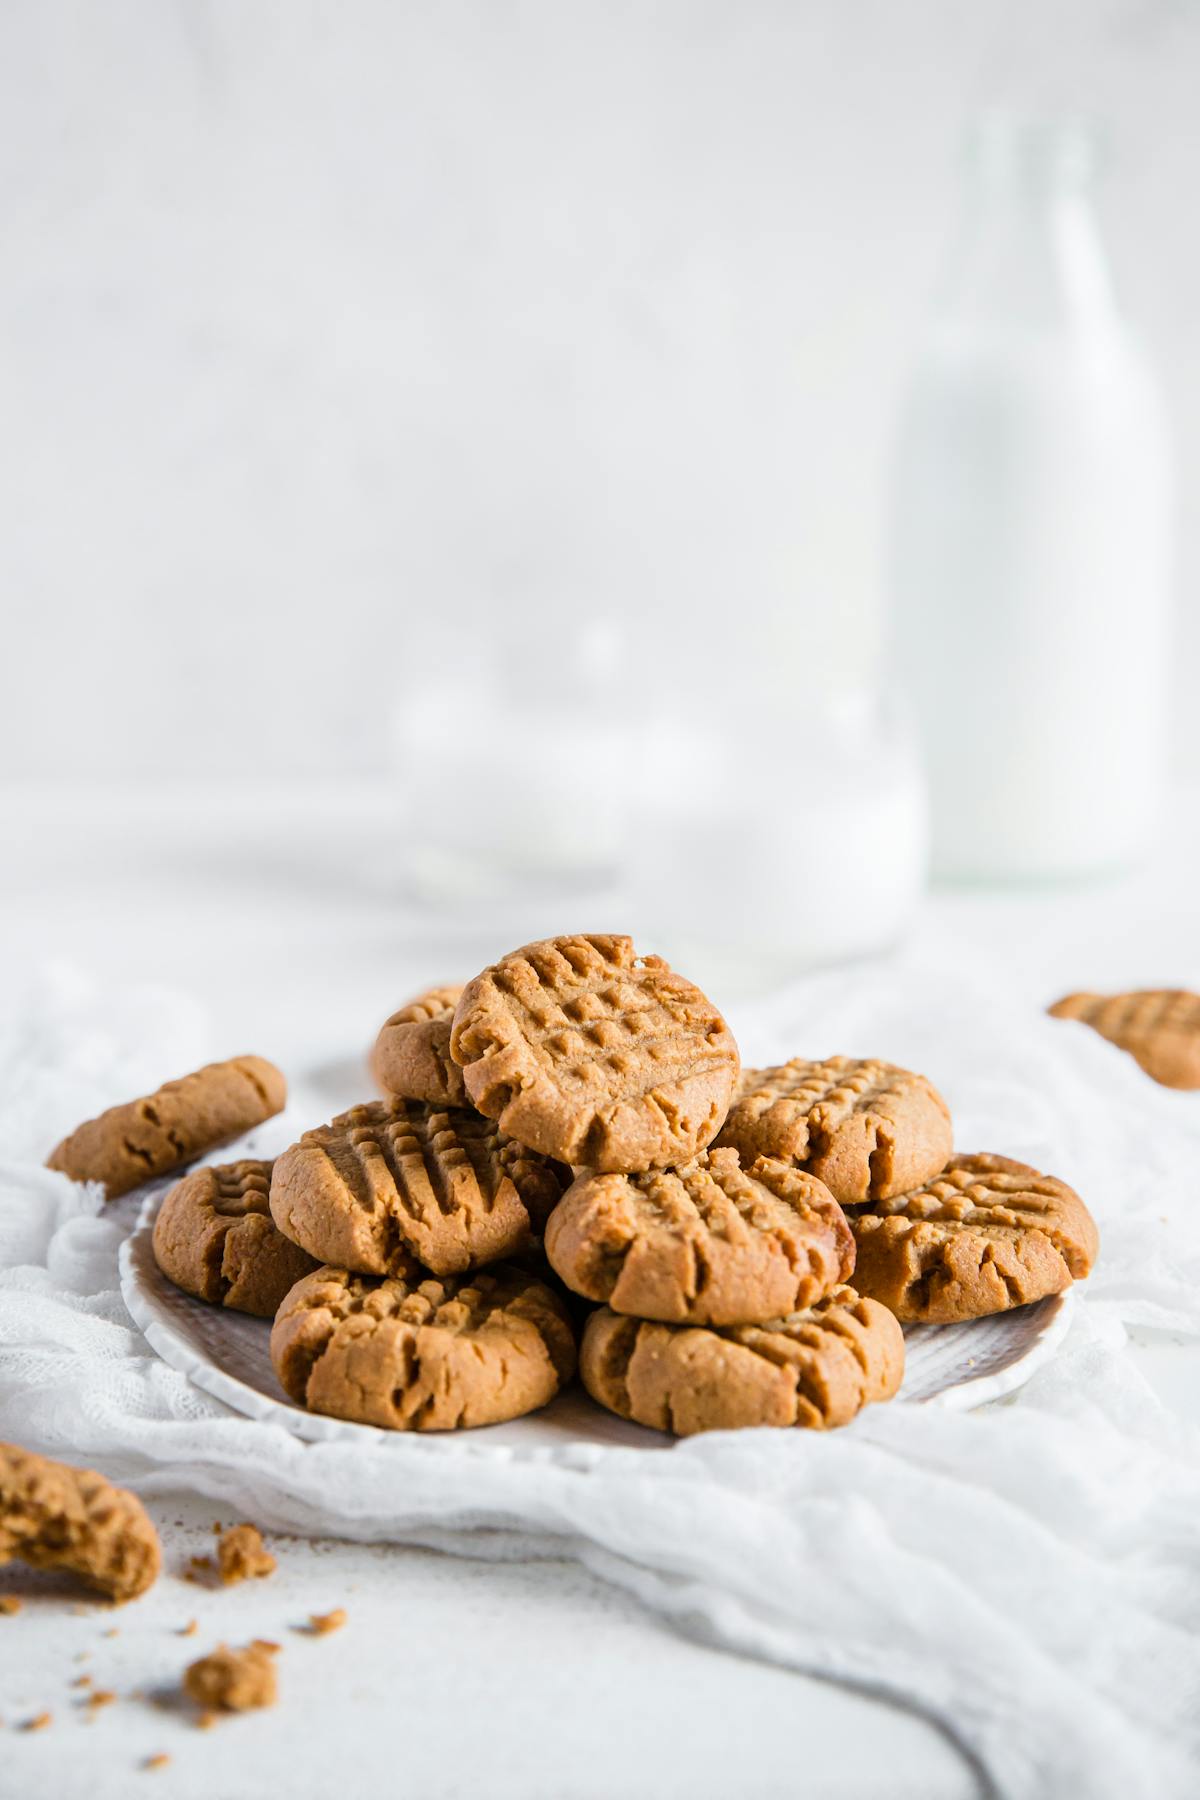 Low carb peanut butter cookies